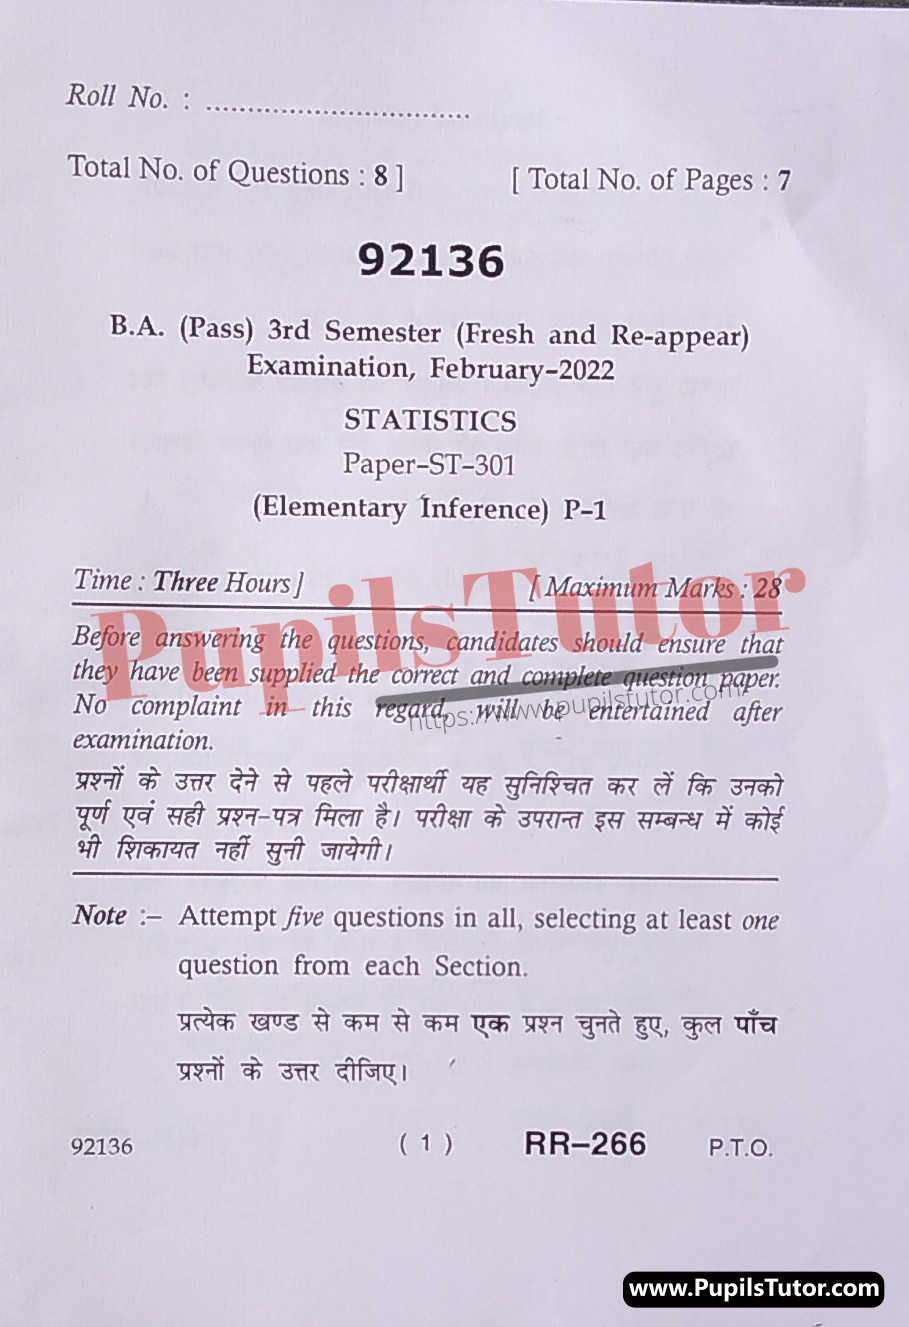 MDU (Maharshi Dayanand University, Rohtak Haryana) BA Pass Course Third Semester Previous Year Statistics (Elementary Inference) Question Paper For February, 2022 Exam (Question Paper Page 1) - pupilstutor.com